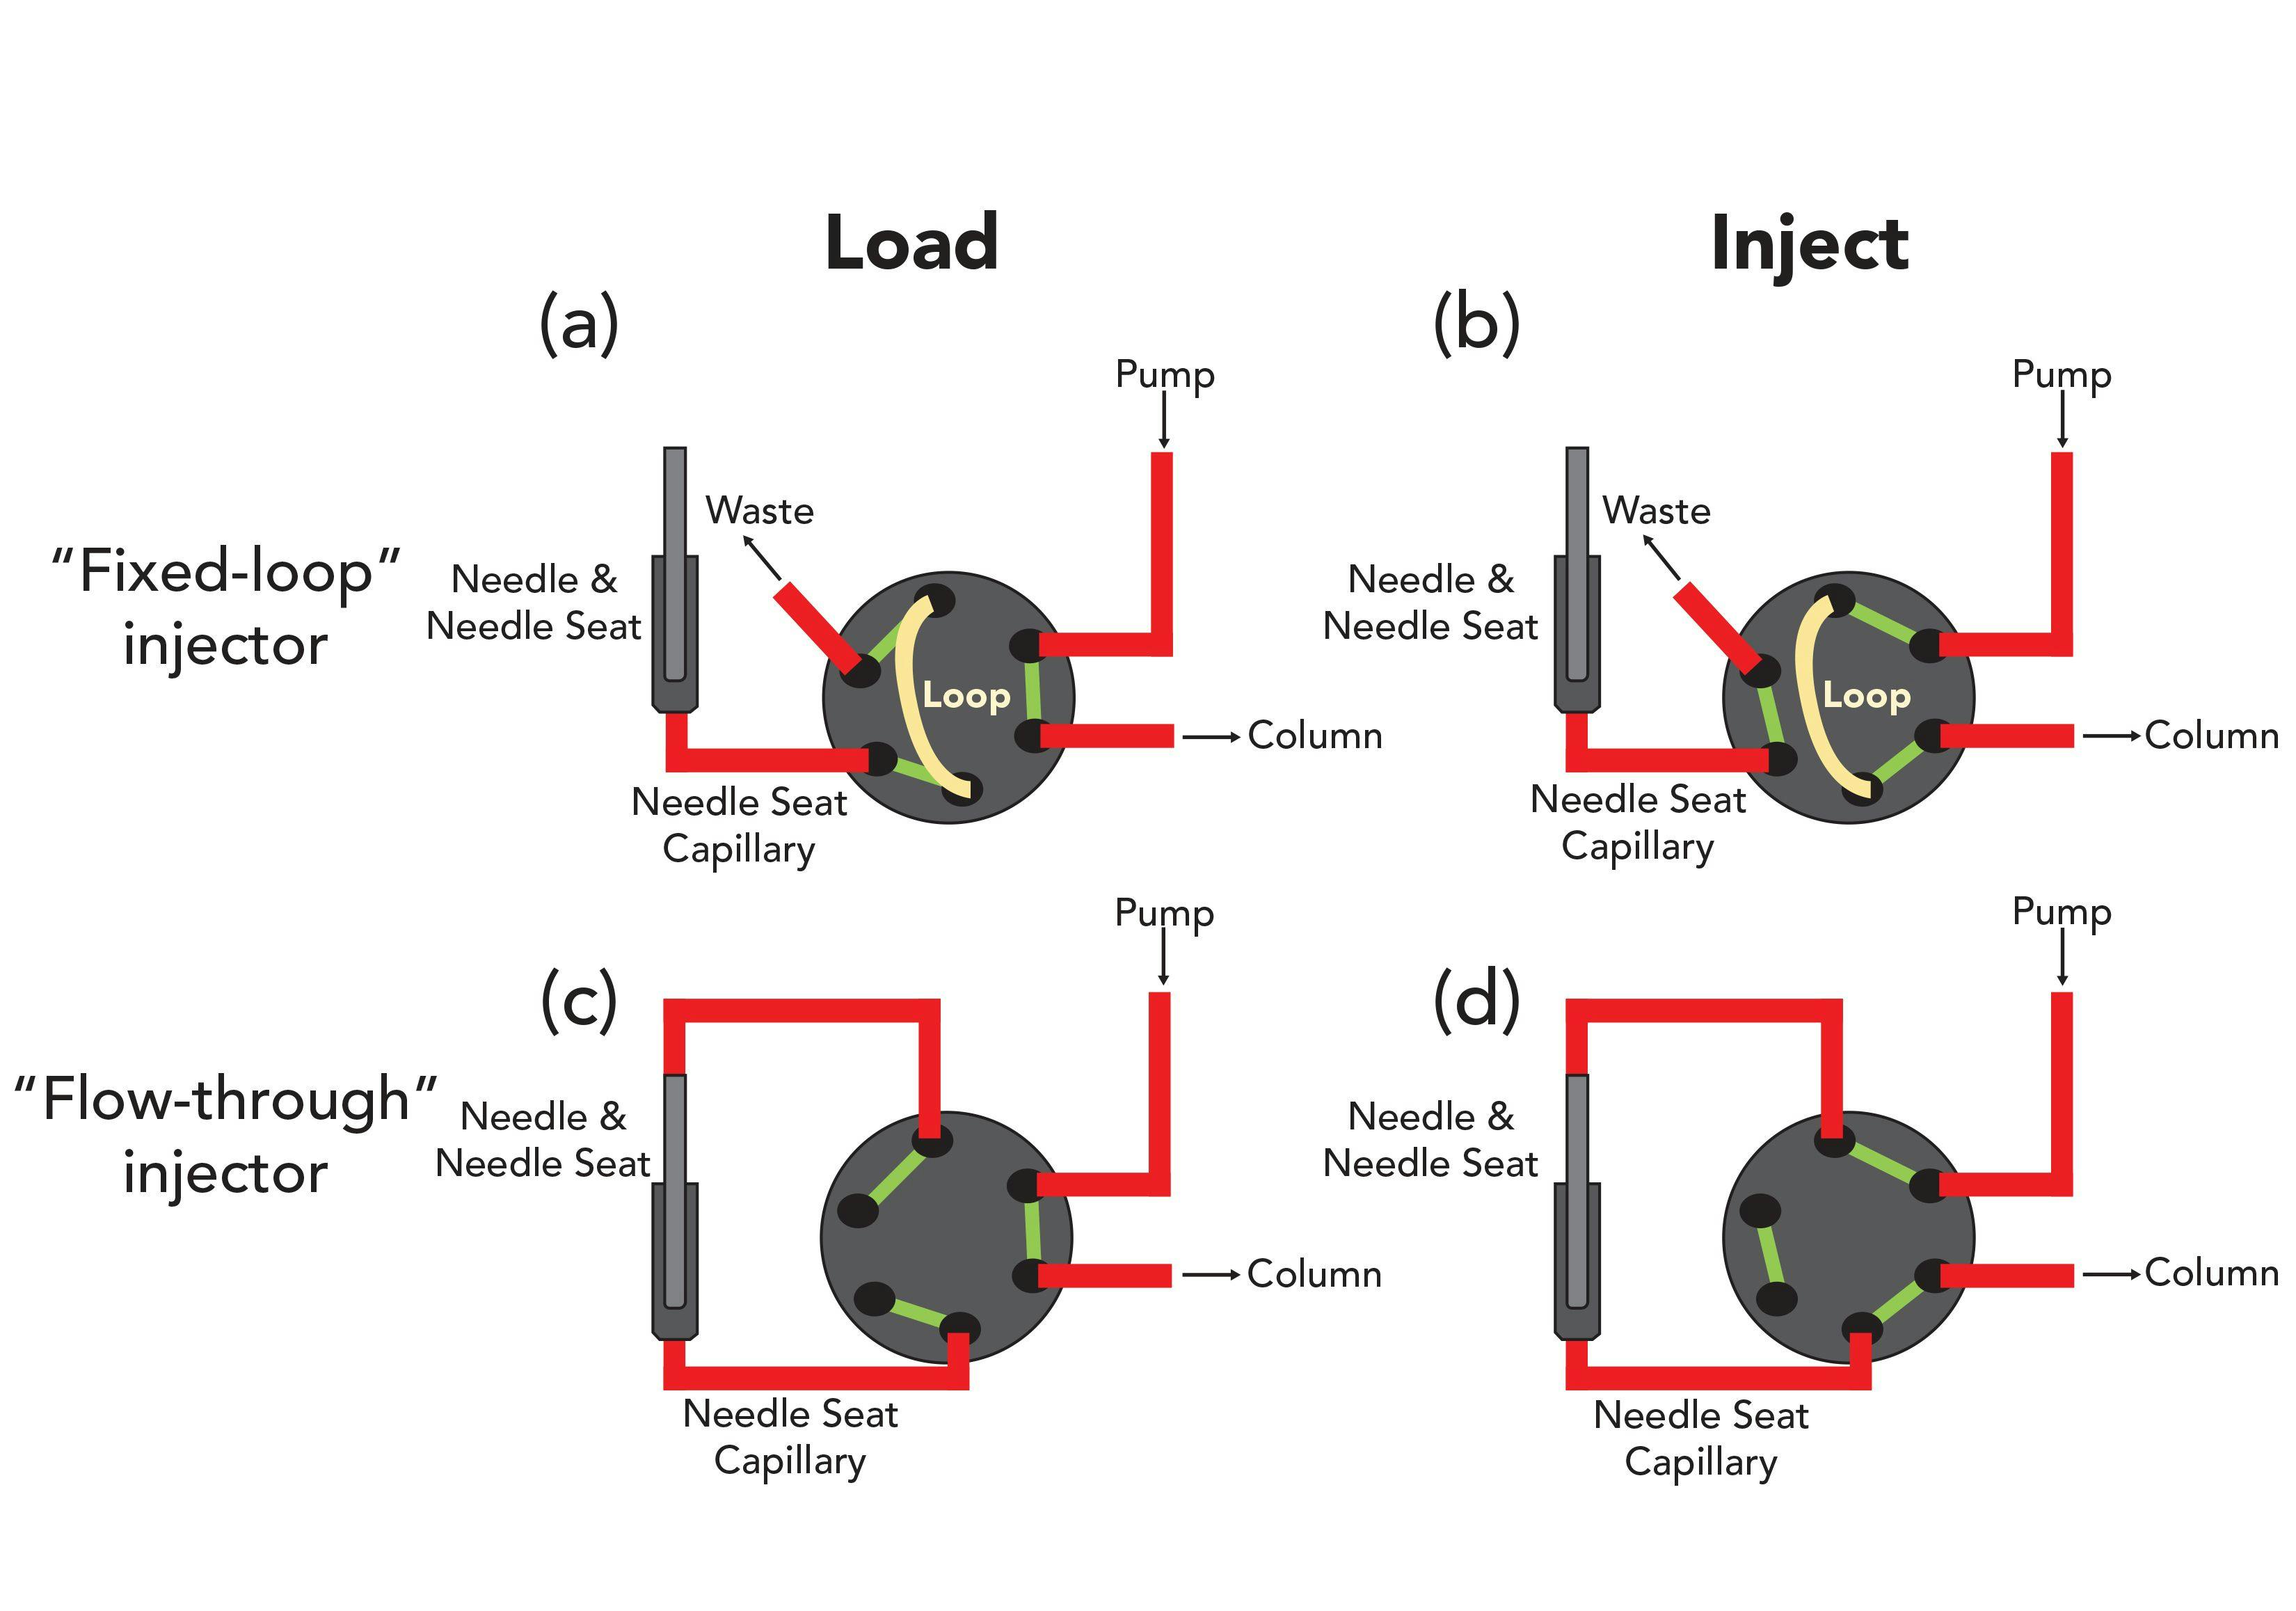 FIGURE 2: Drawings showing the flow paths through different injection systems during loading (a and c) or injection (b and d) of samples into a column. Figures 2a and 2b show a fixed-loop injector; Figures 2c and 2d show a flow-through needle injector.